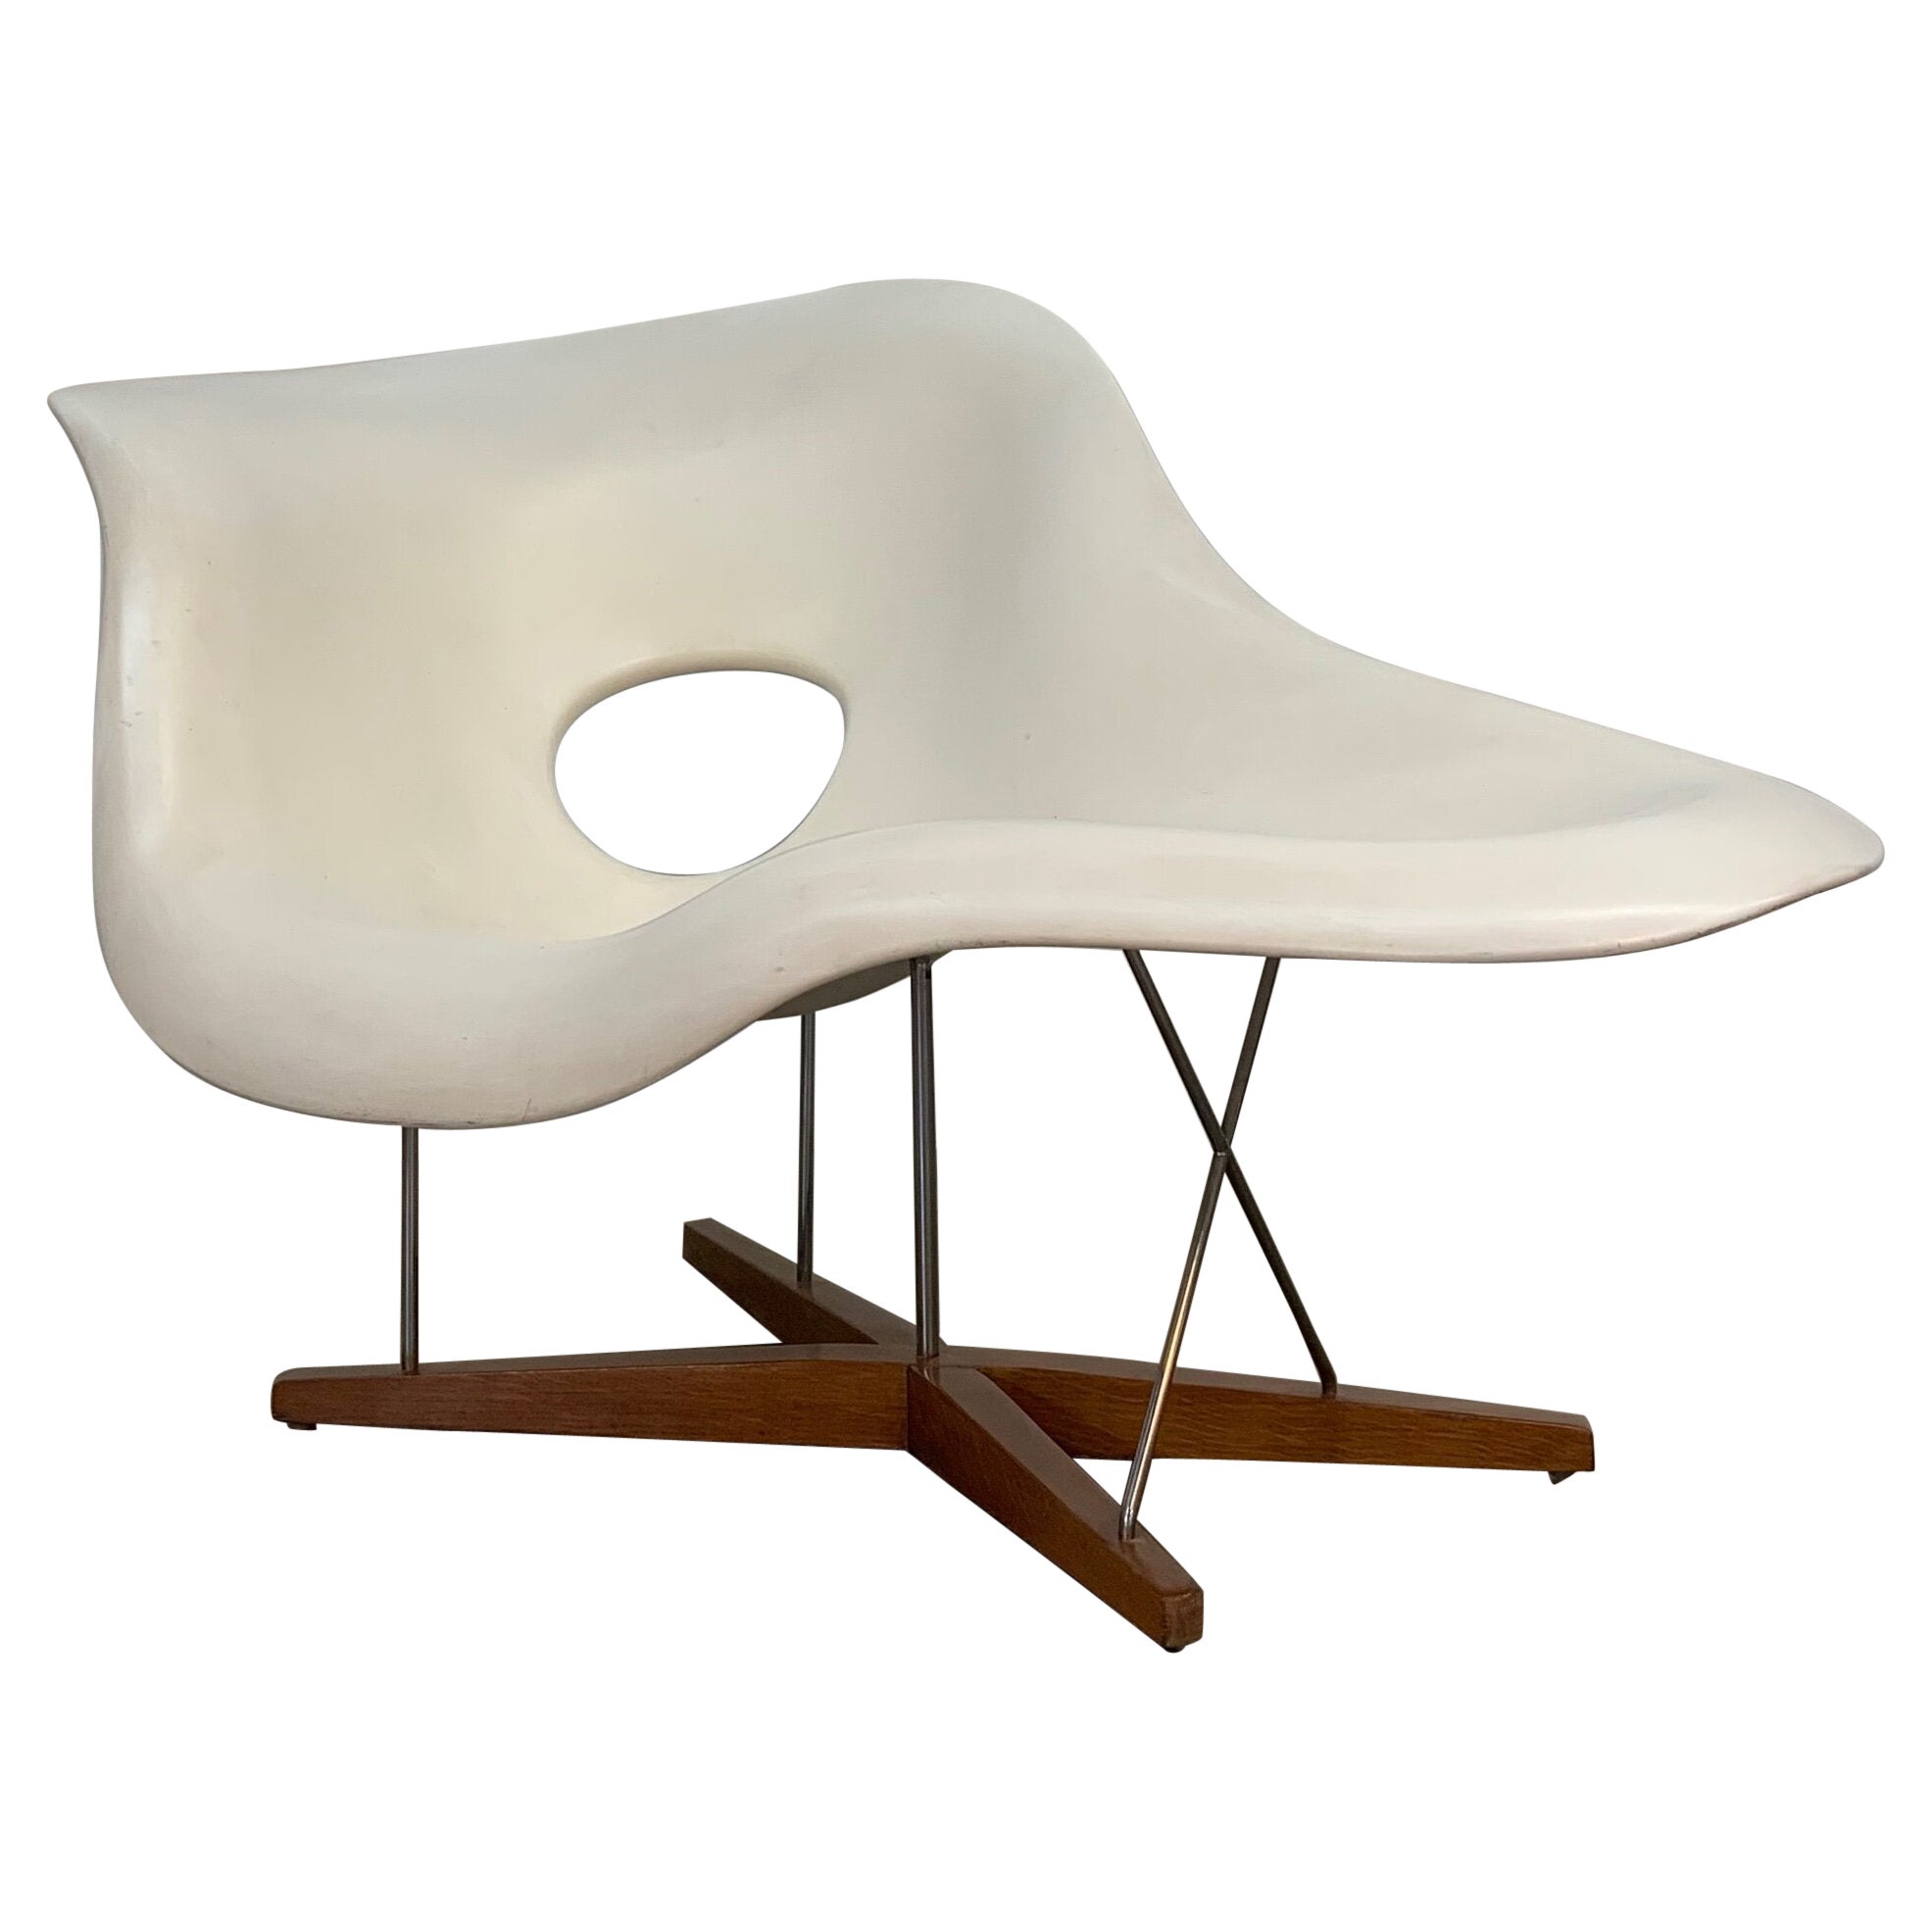 La Chaise Vitra - 4 For Sale on 1stDibs